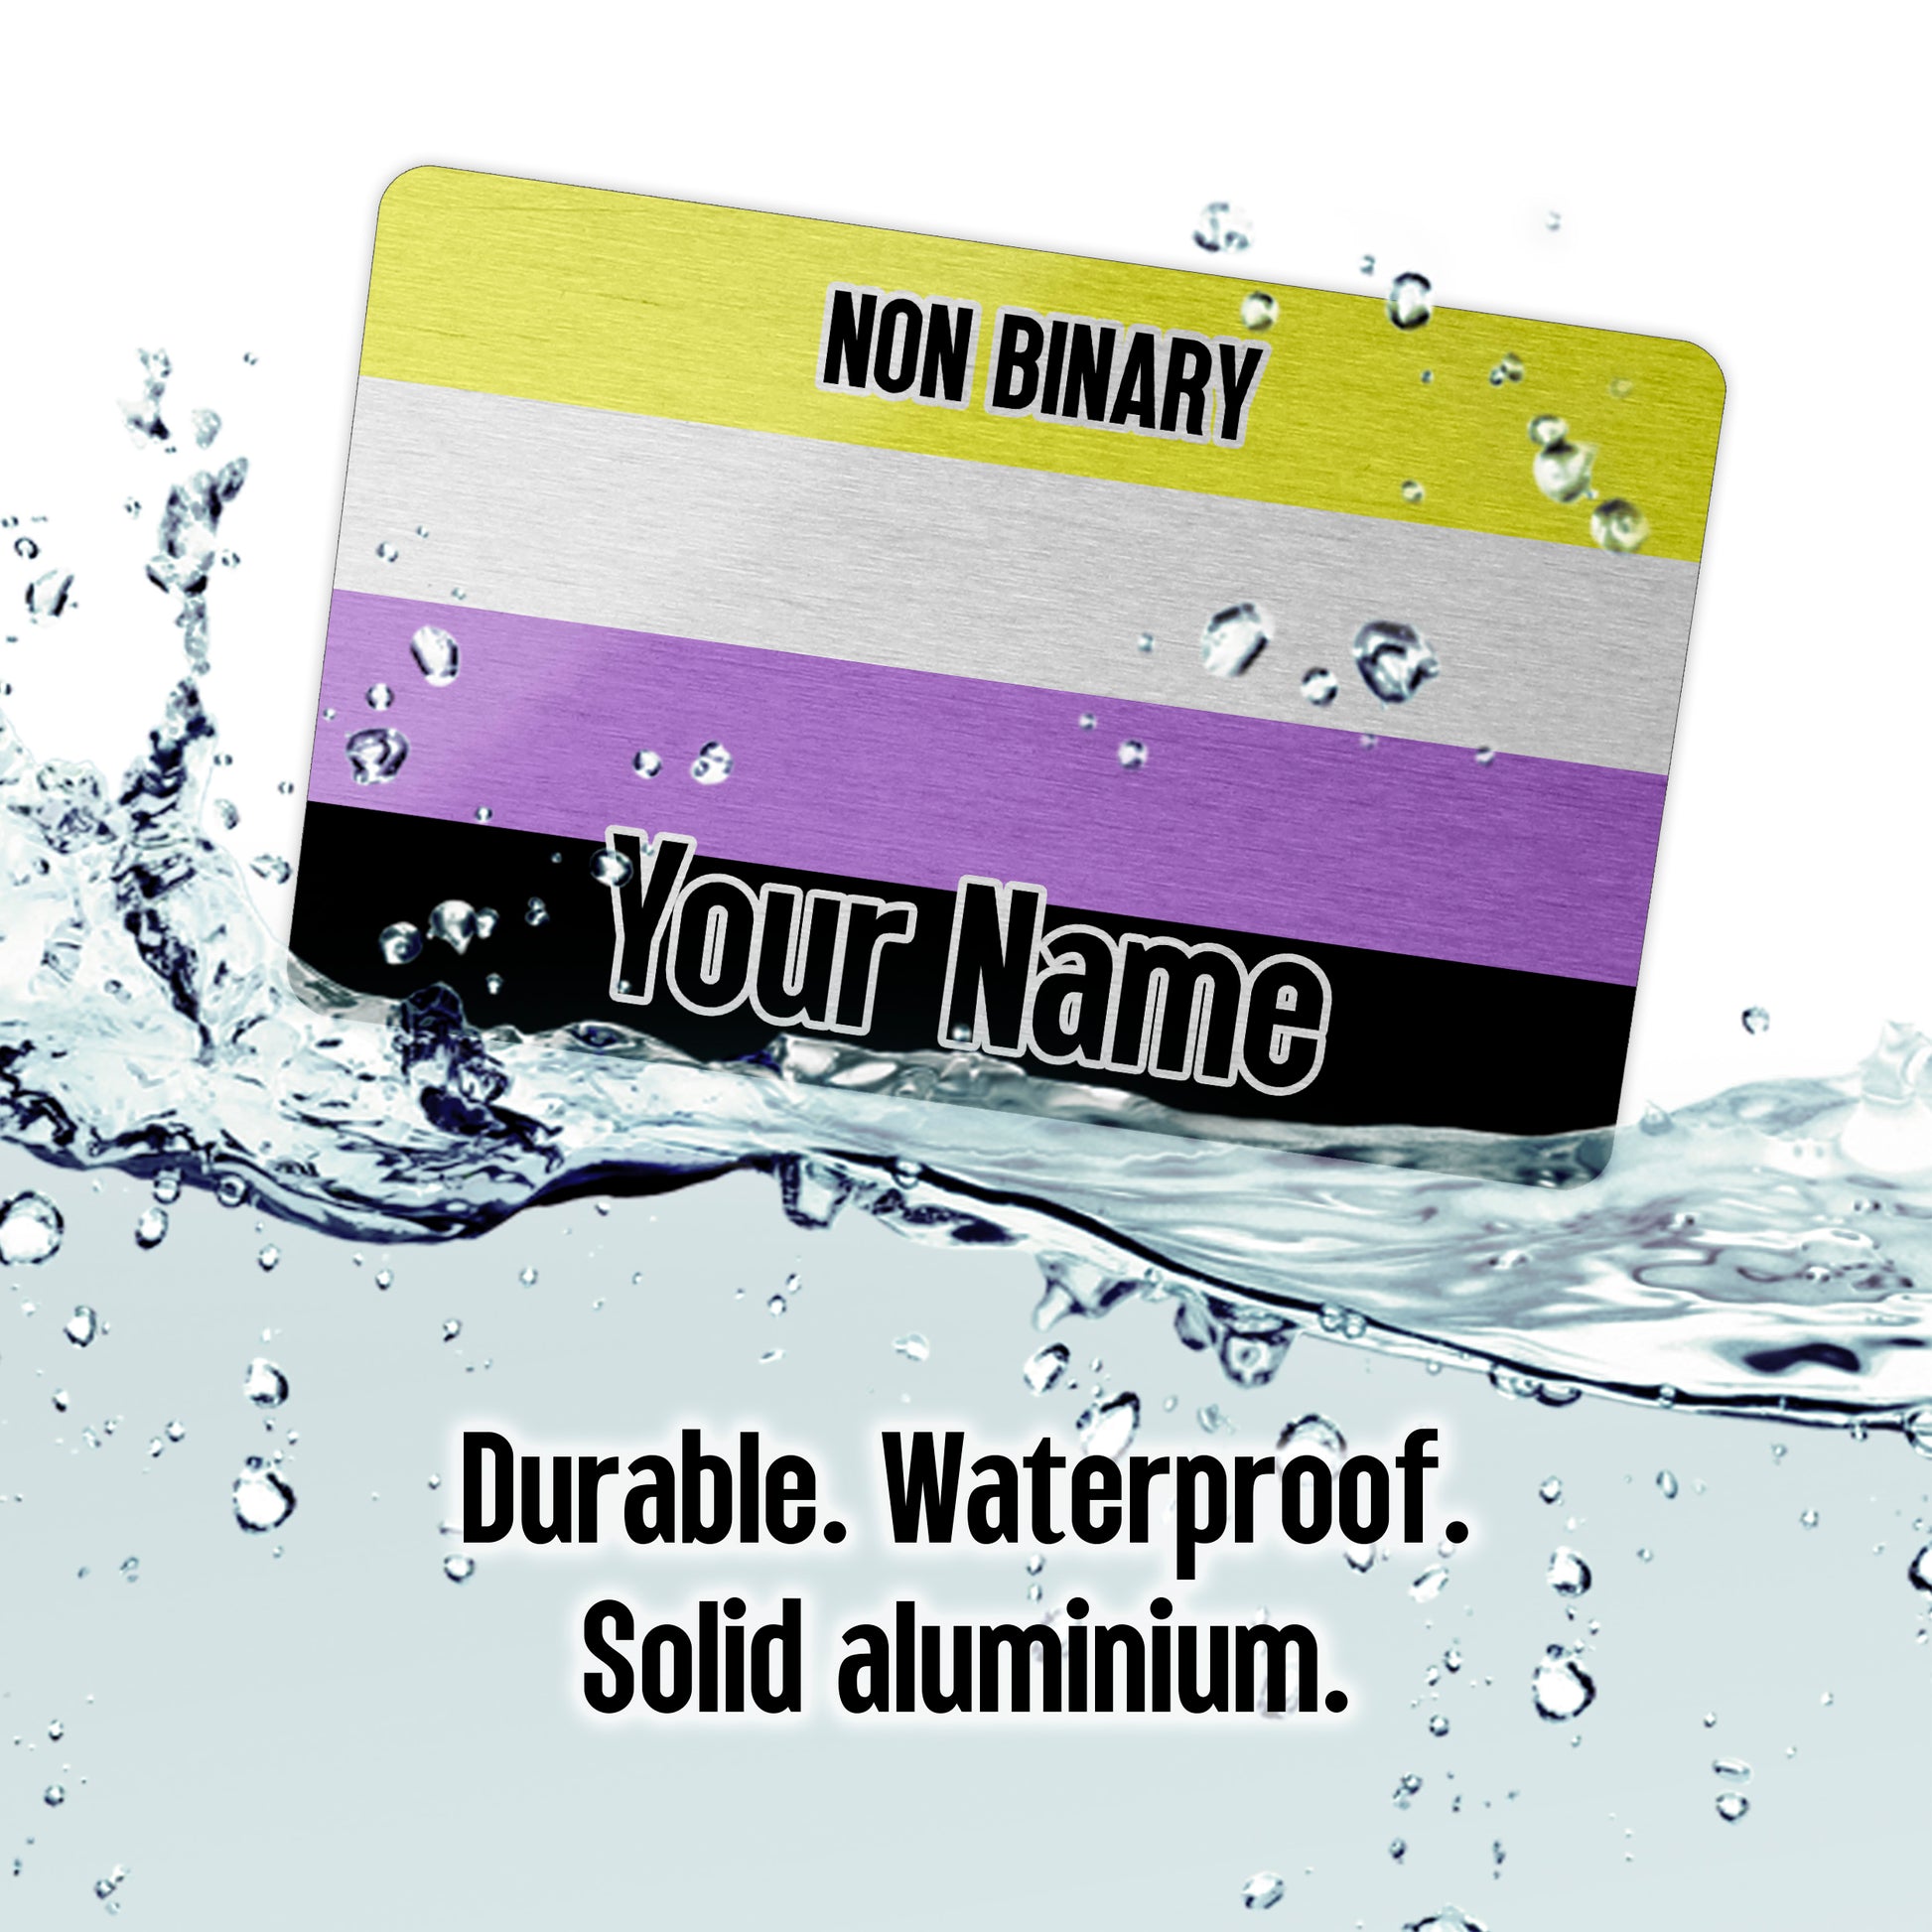 Aluminium wallet card personalised with your name and the non binary pride flag